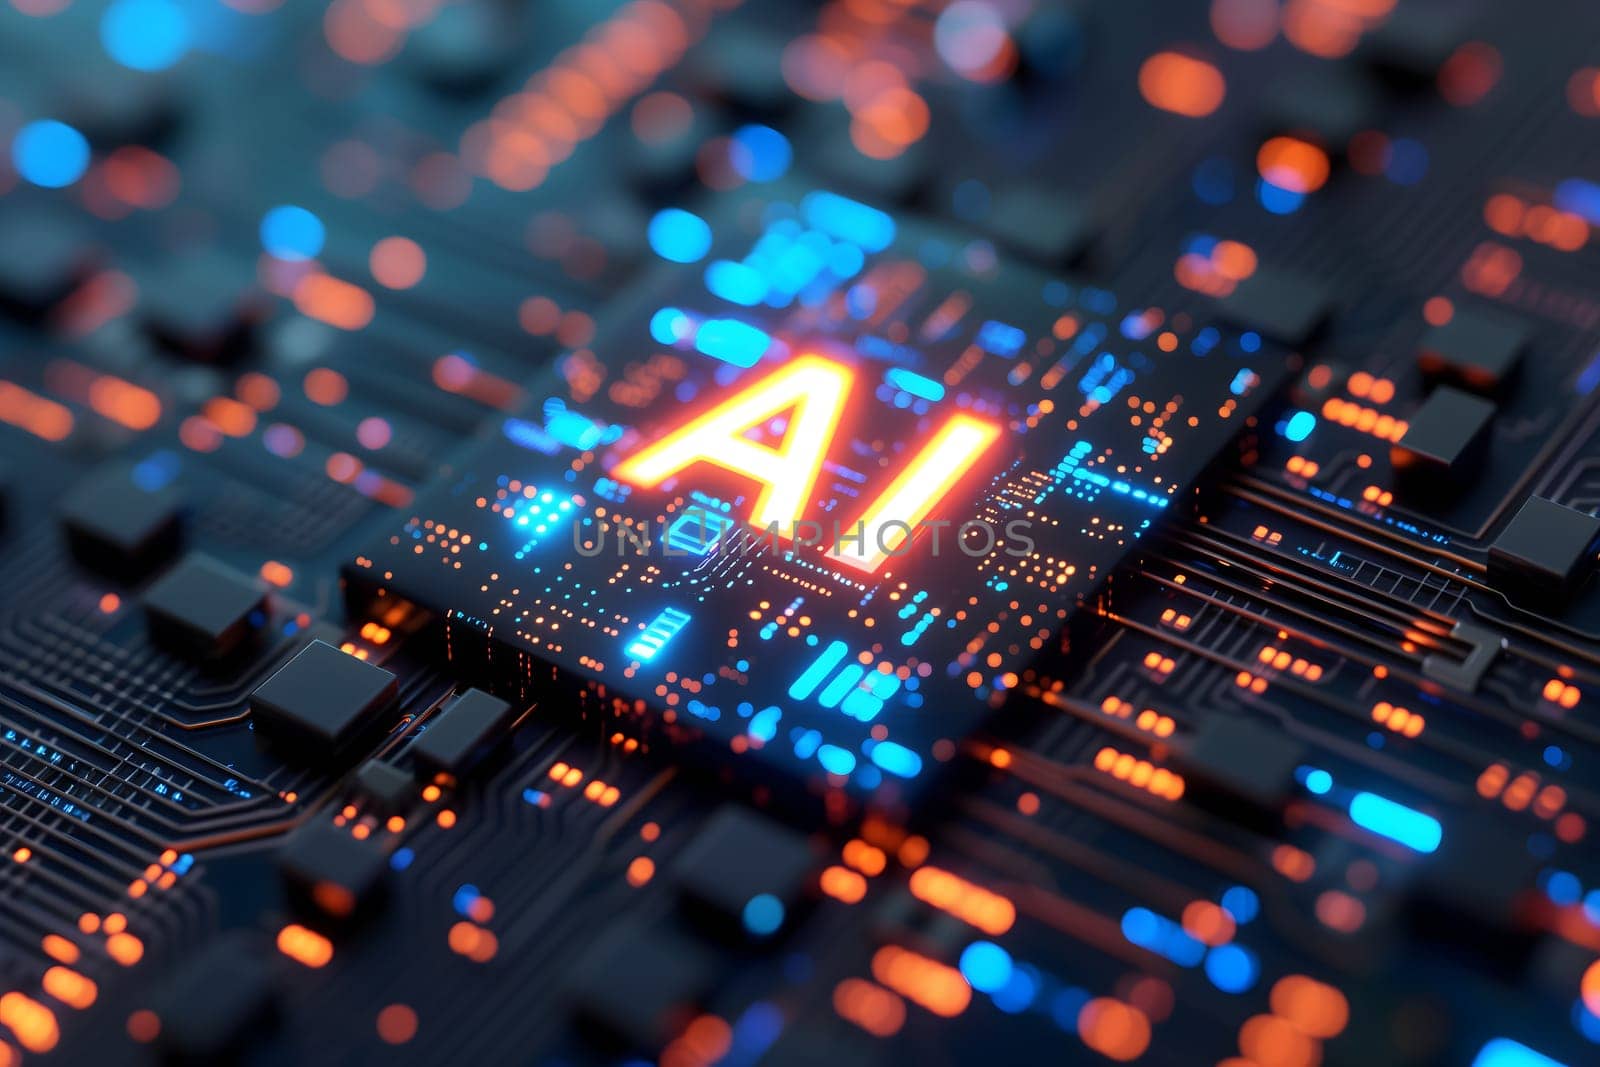 word AI - artificial intelligence circuit board with blue and orange glow, dedicated AI hardware concept